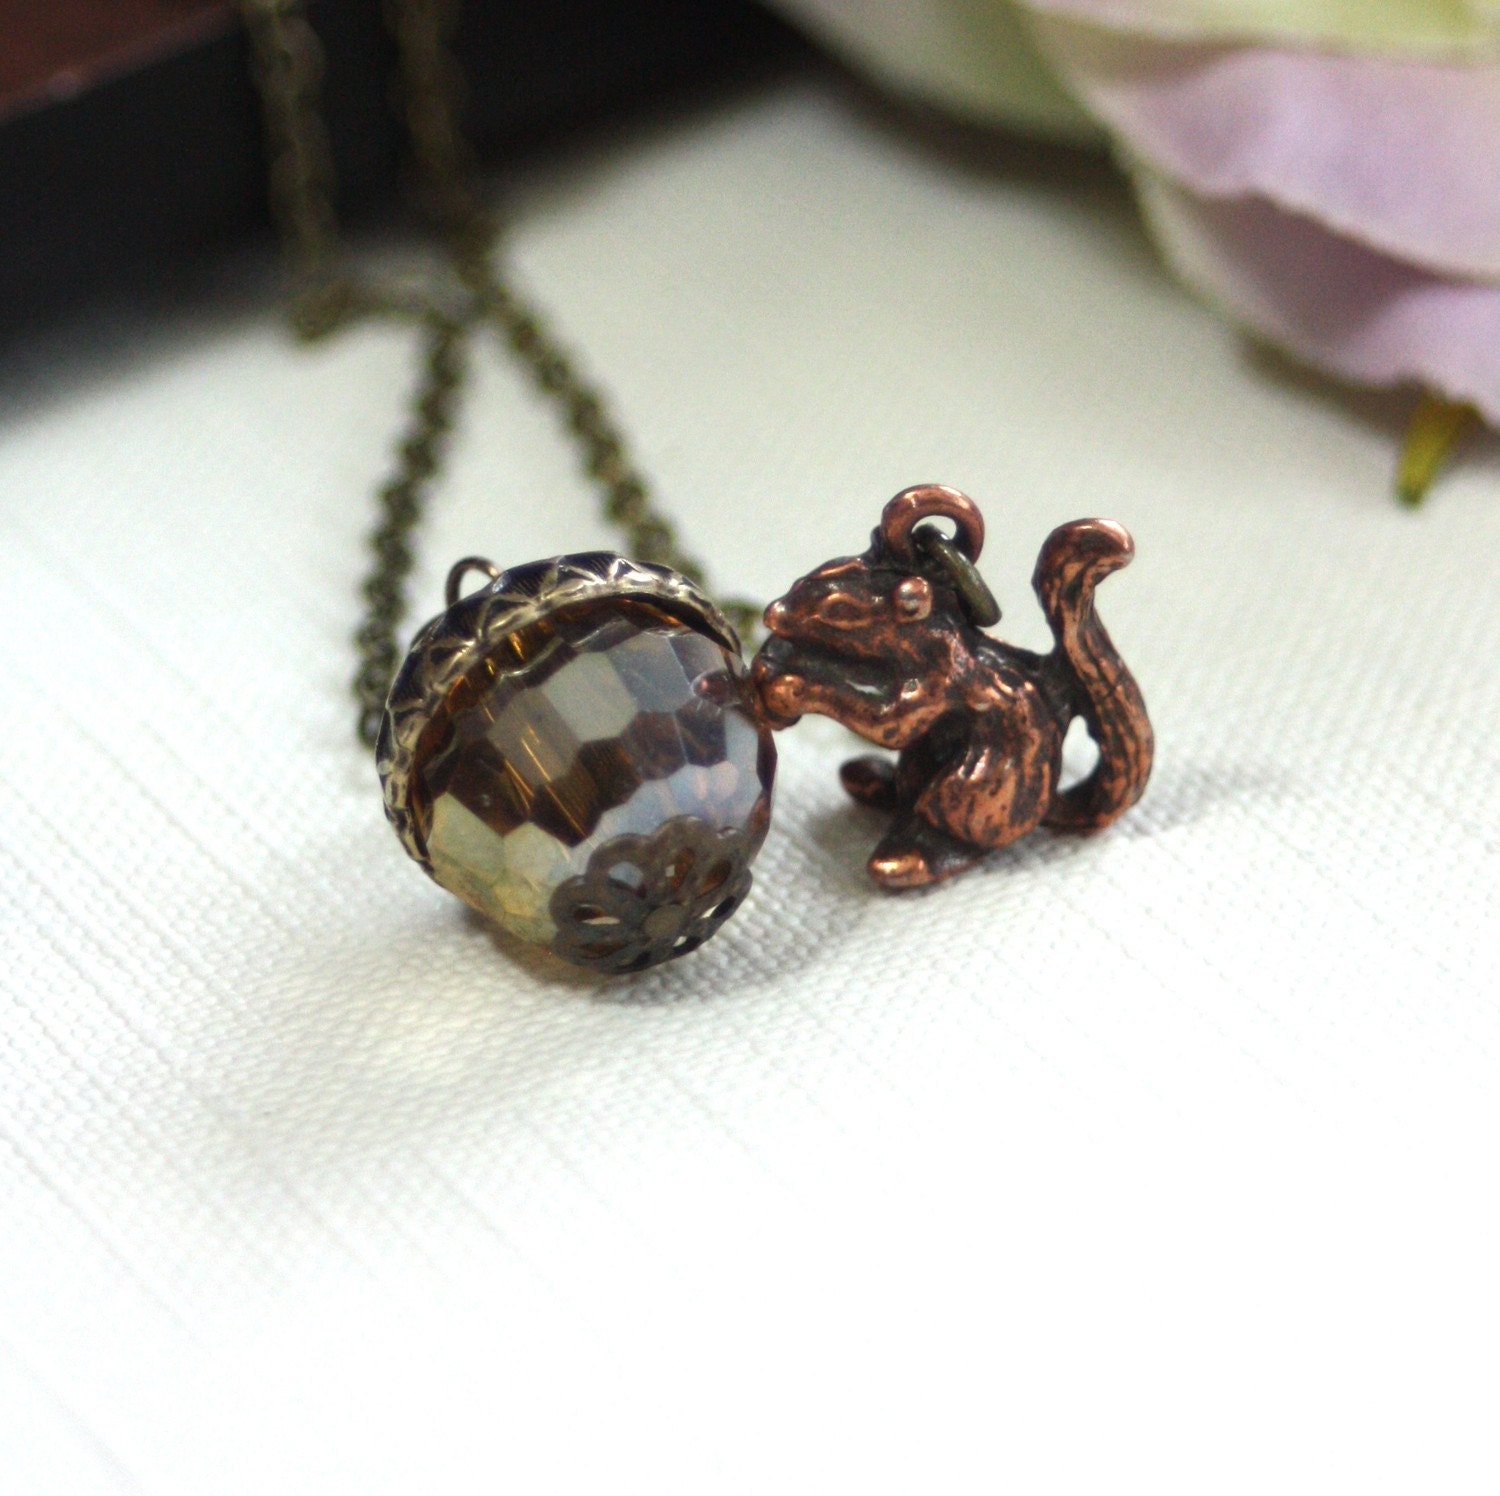 A Squirrel and Its Precious Acorn Lariat Necklace -  Cute, Ice Age Inspired, Adorable, Whimsical